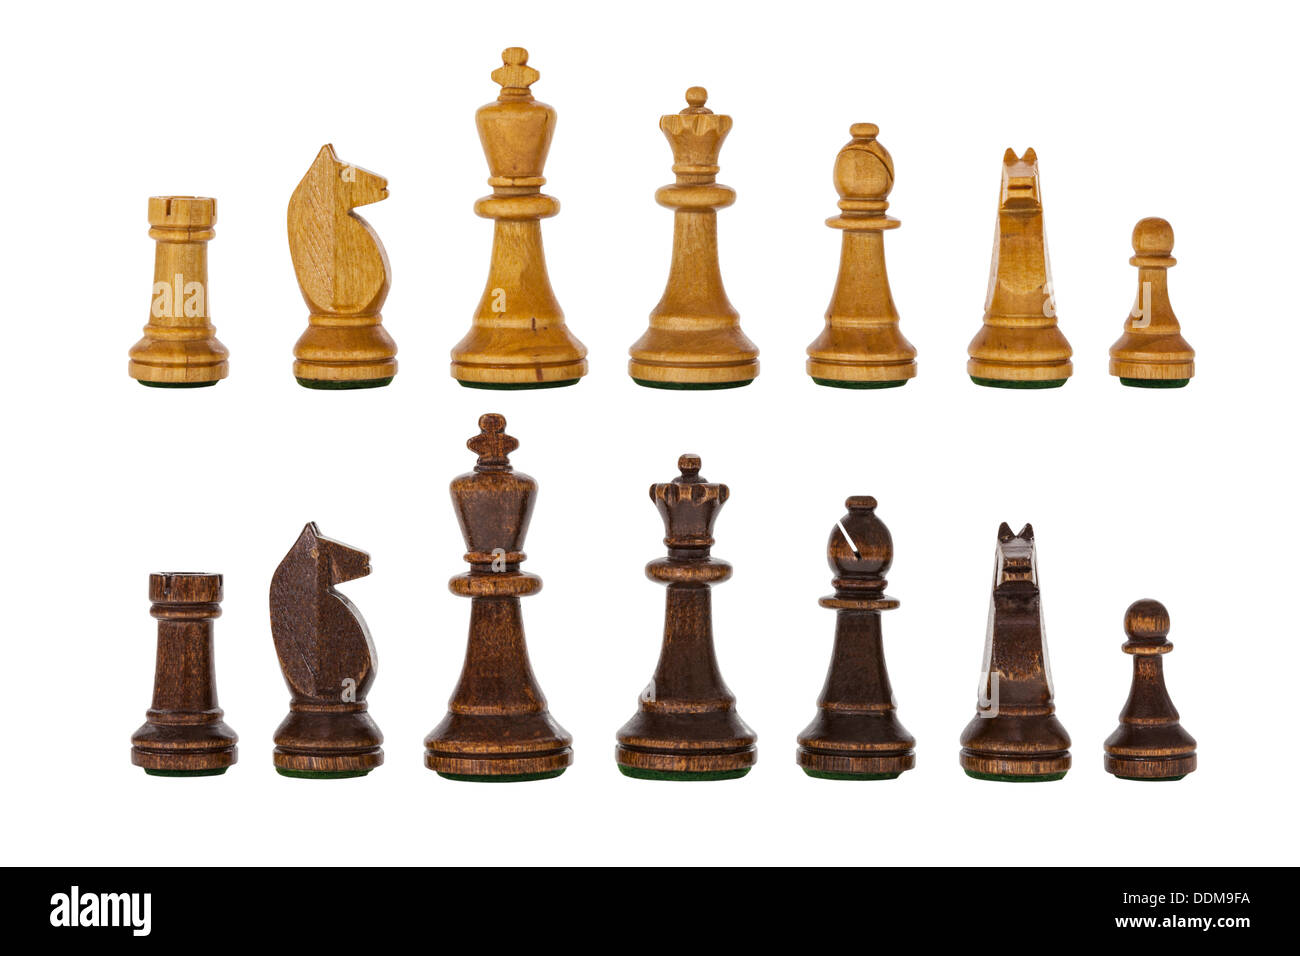 Vintage wooden chess set pieces isolated with clipping paths. Stock Photo